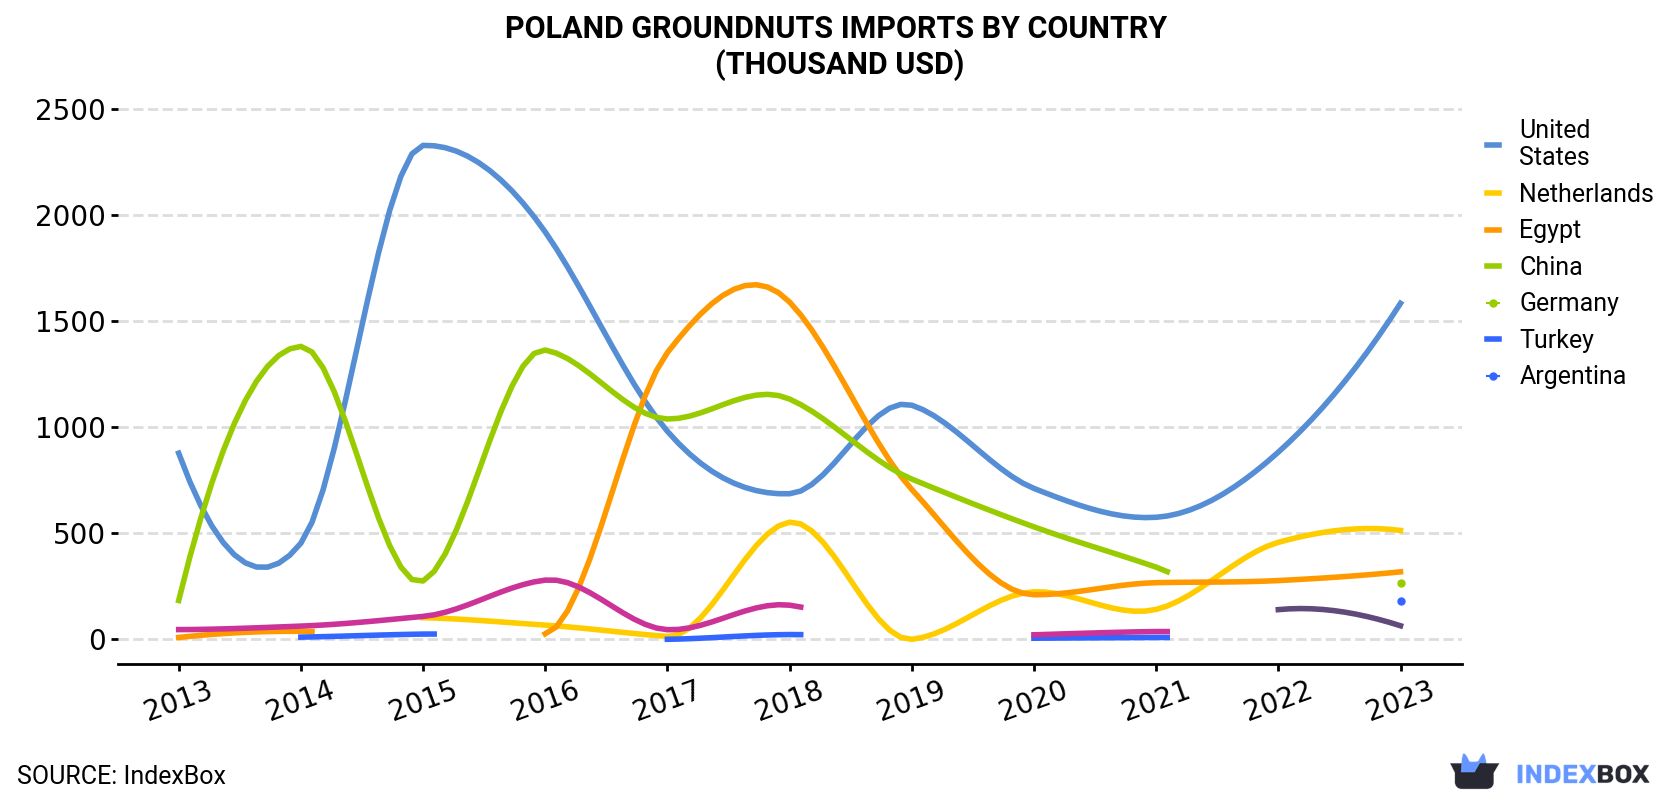 Poland Groundnuts Imports By Country (Thousand USD)